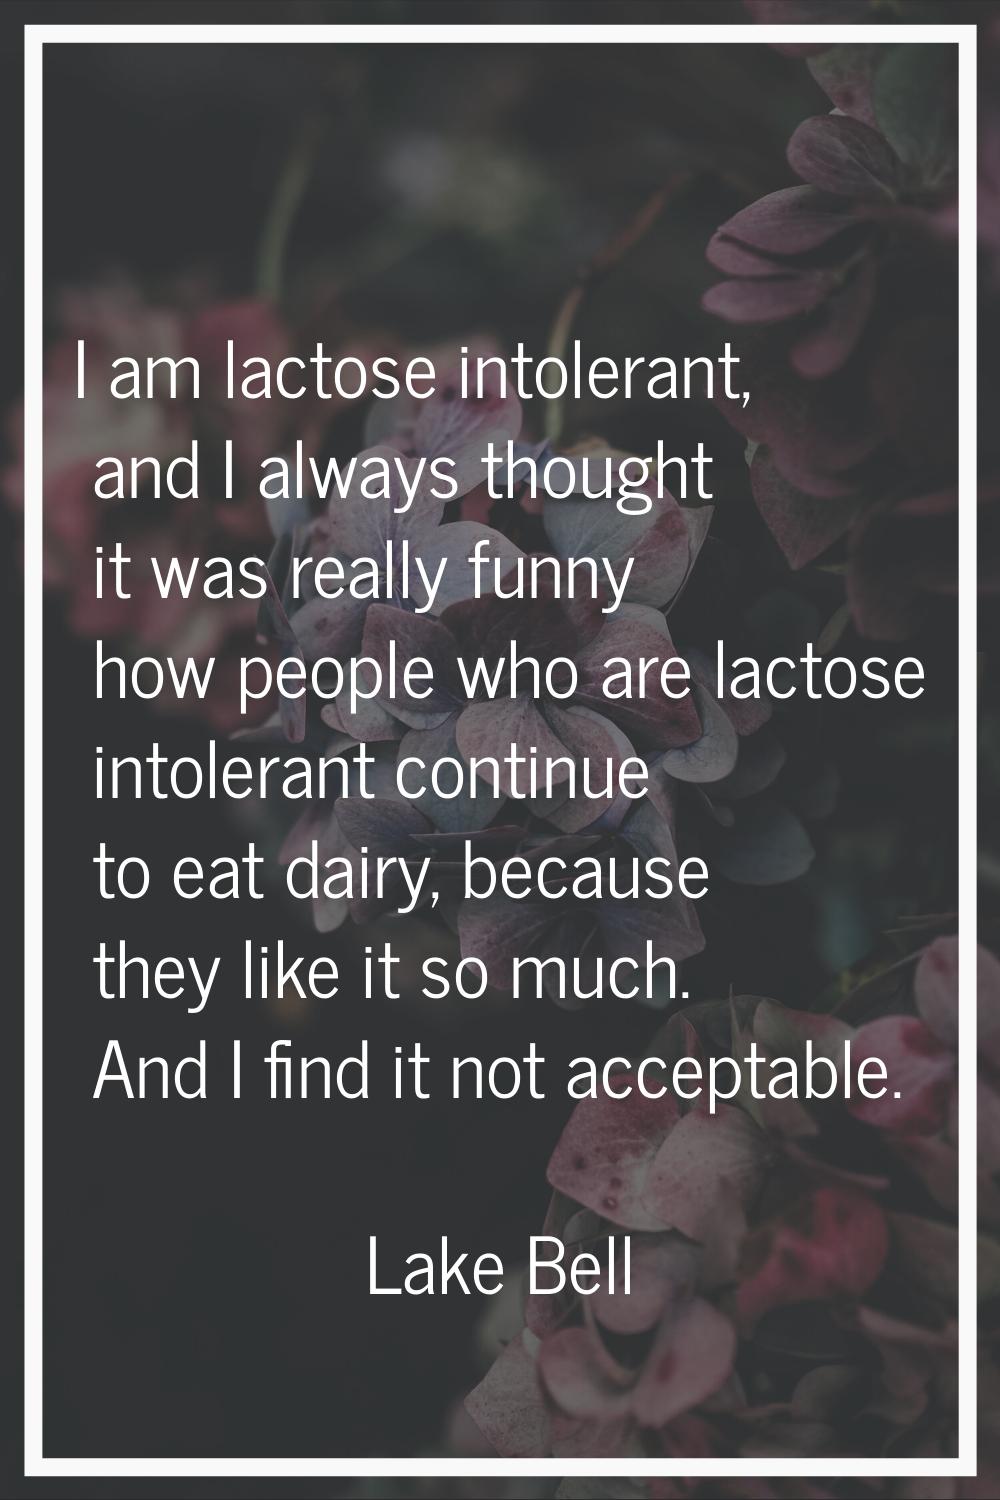 I am lactose intolerant, and I always thought it was really funny how people who are lactose intole